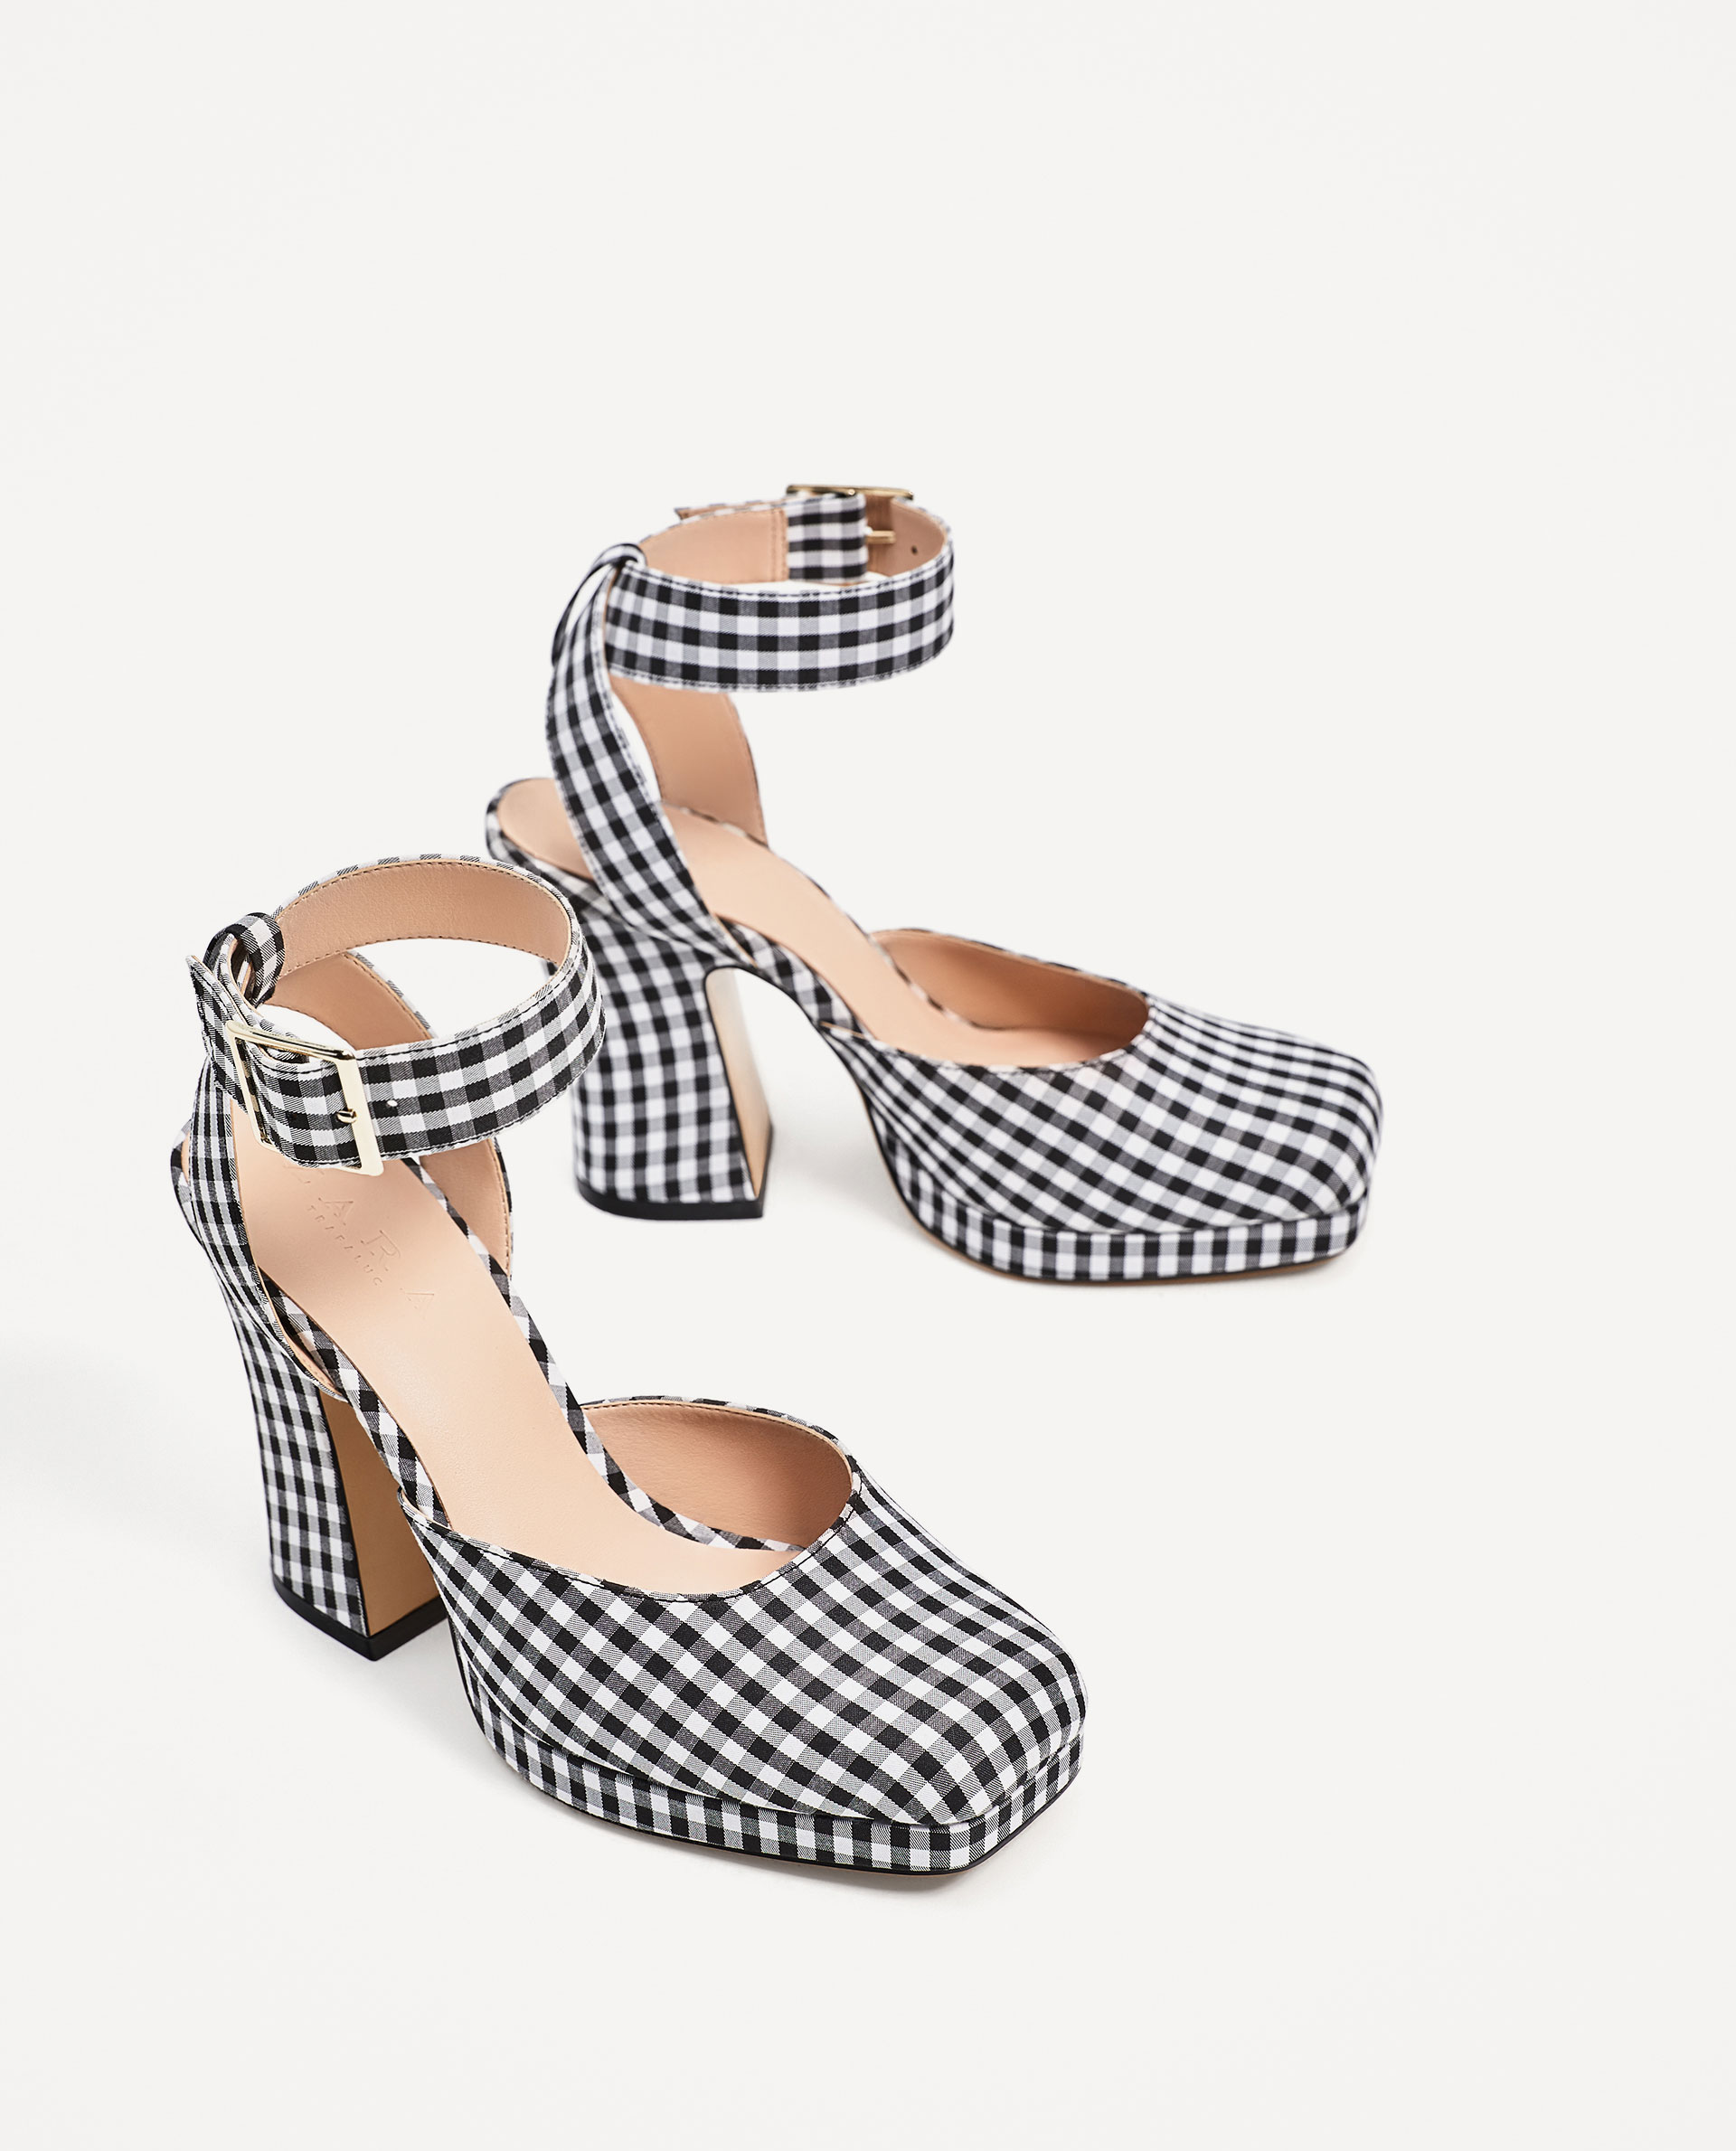 LOVE AT FIRST SIGHT: ZARA CHECKERED SHOES